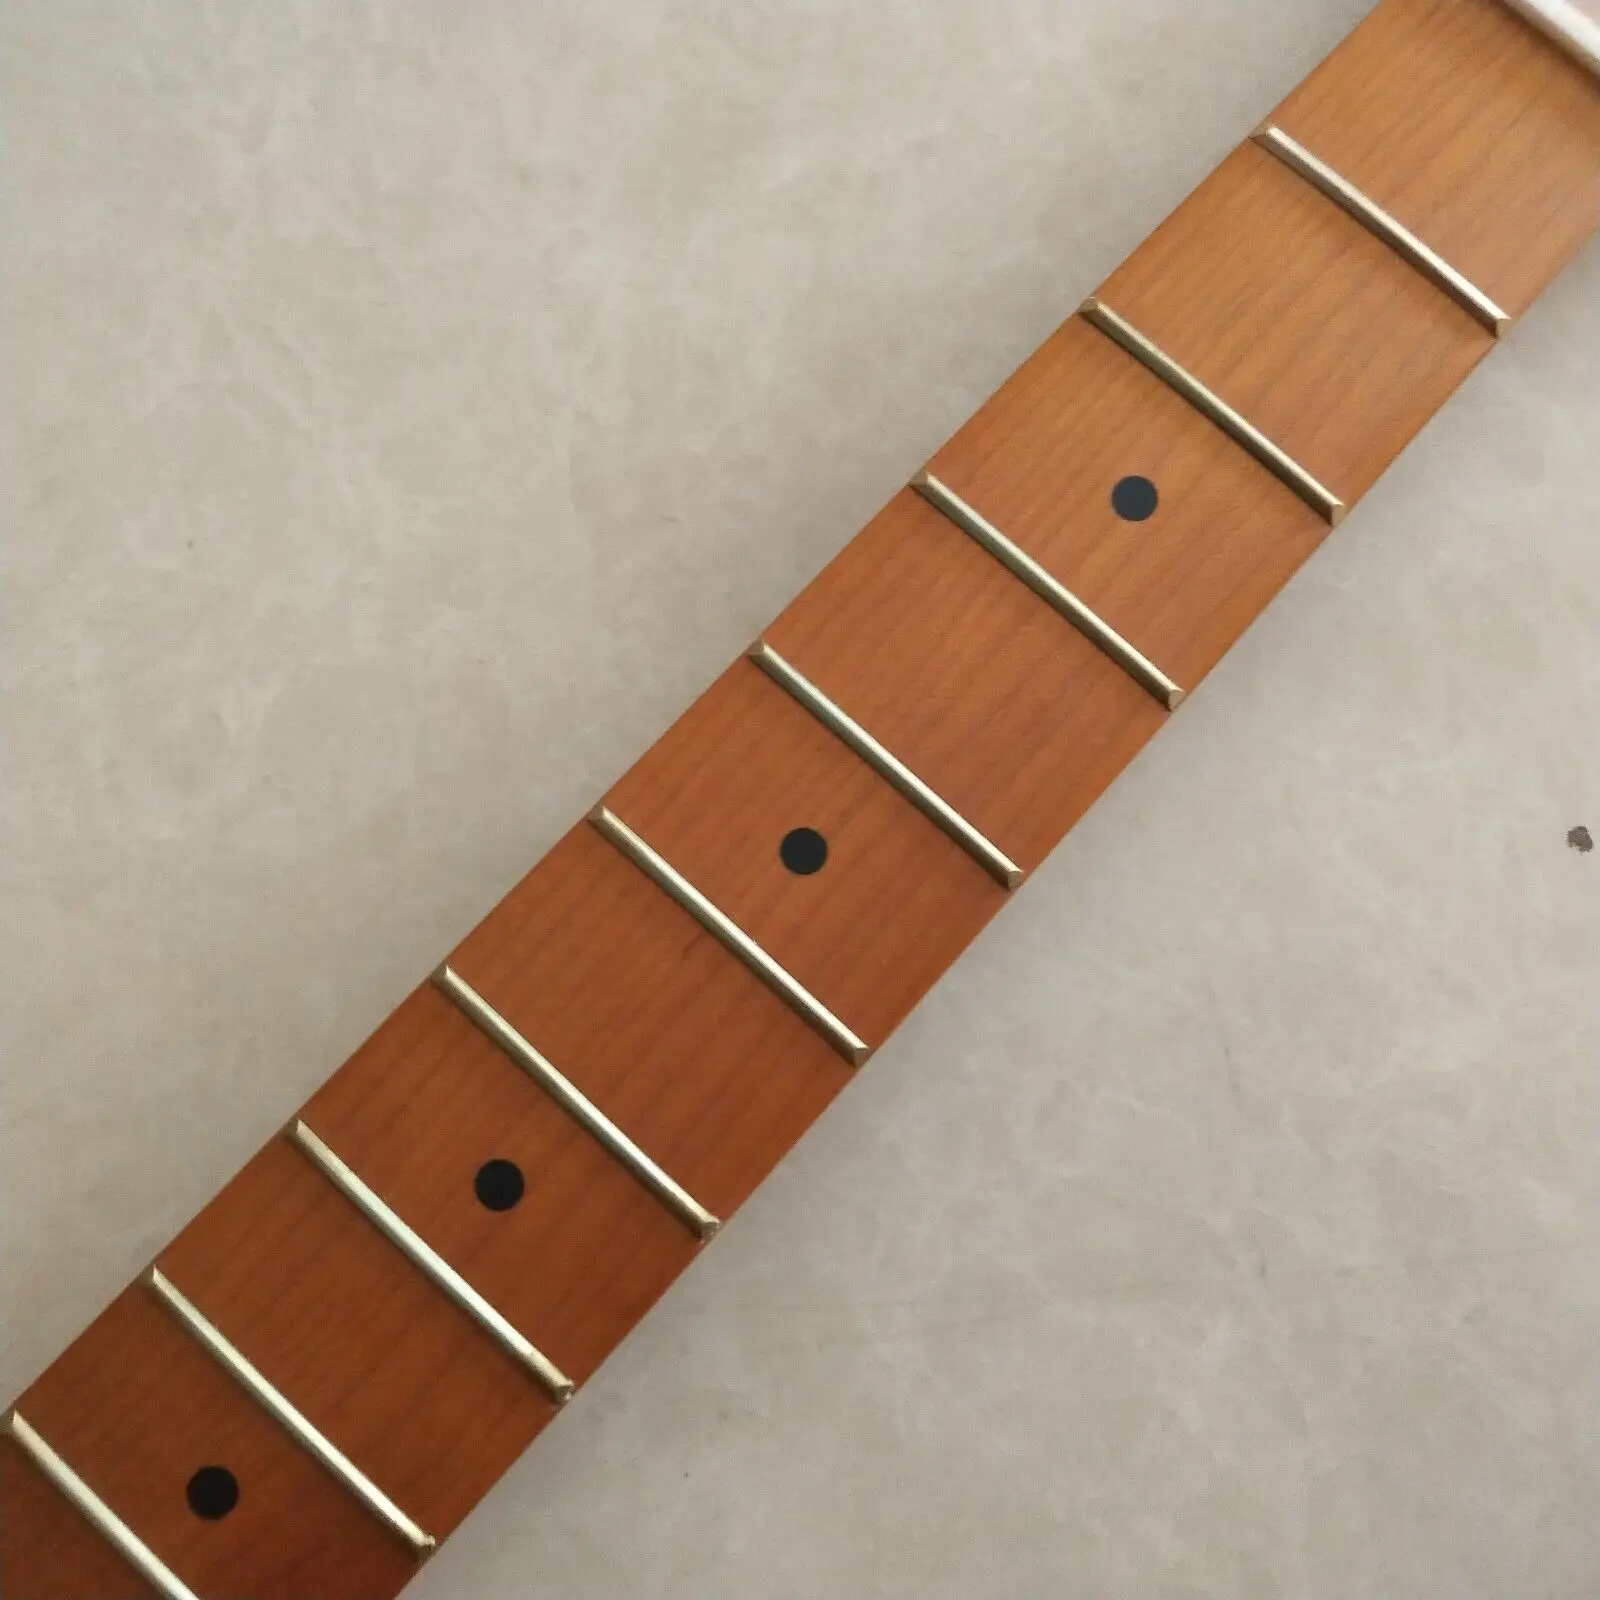 Roasted Maple Guitar Neck 22 Fret 25.5 Inch Fingerboard Dot Inlay Big head parts enlarge